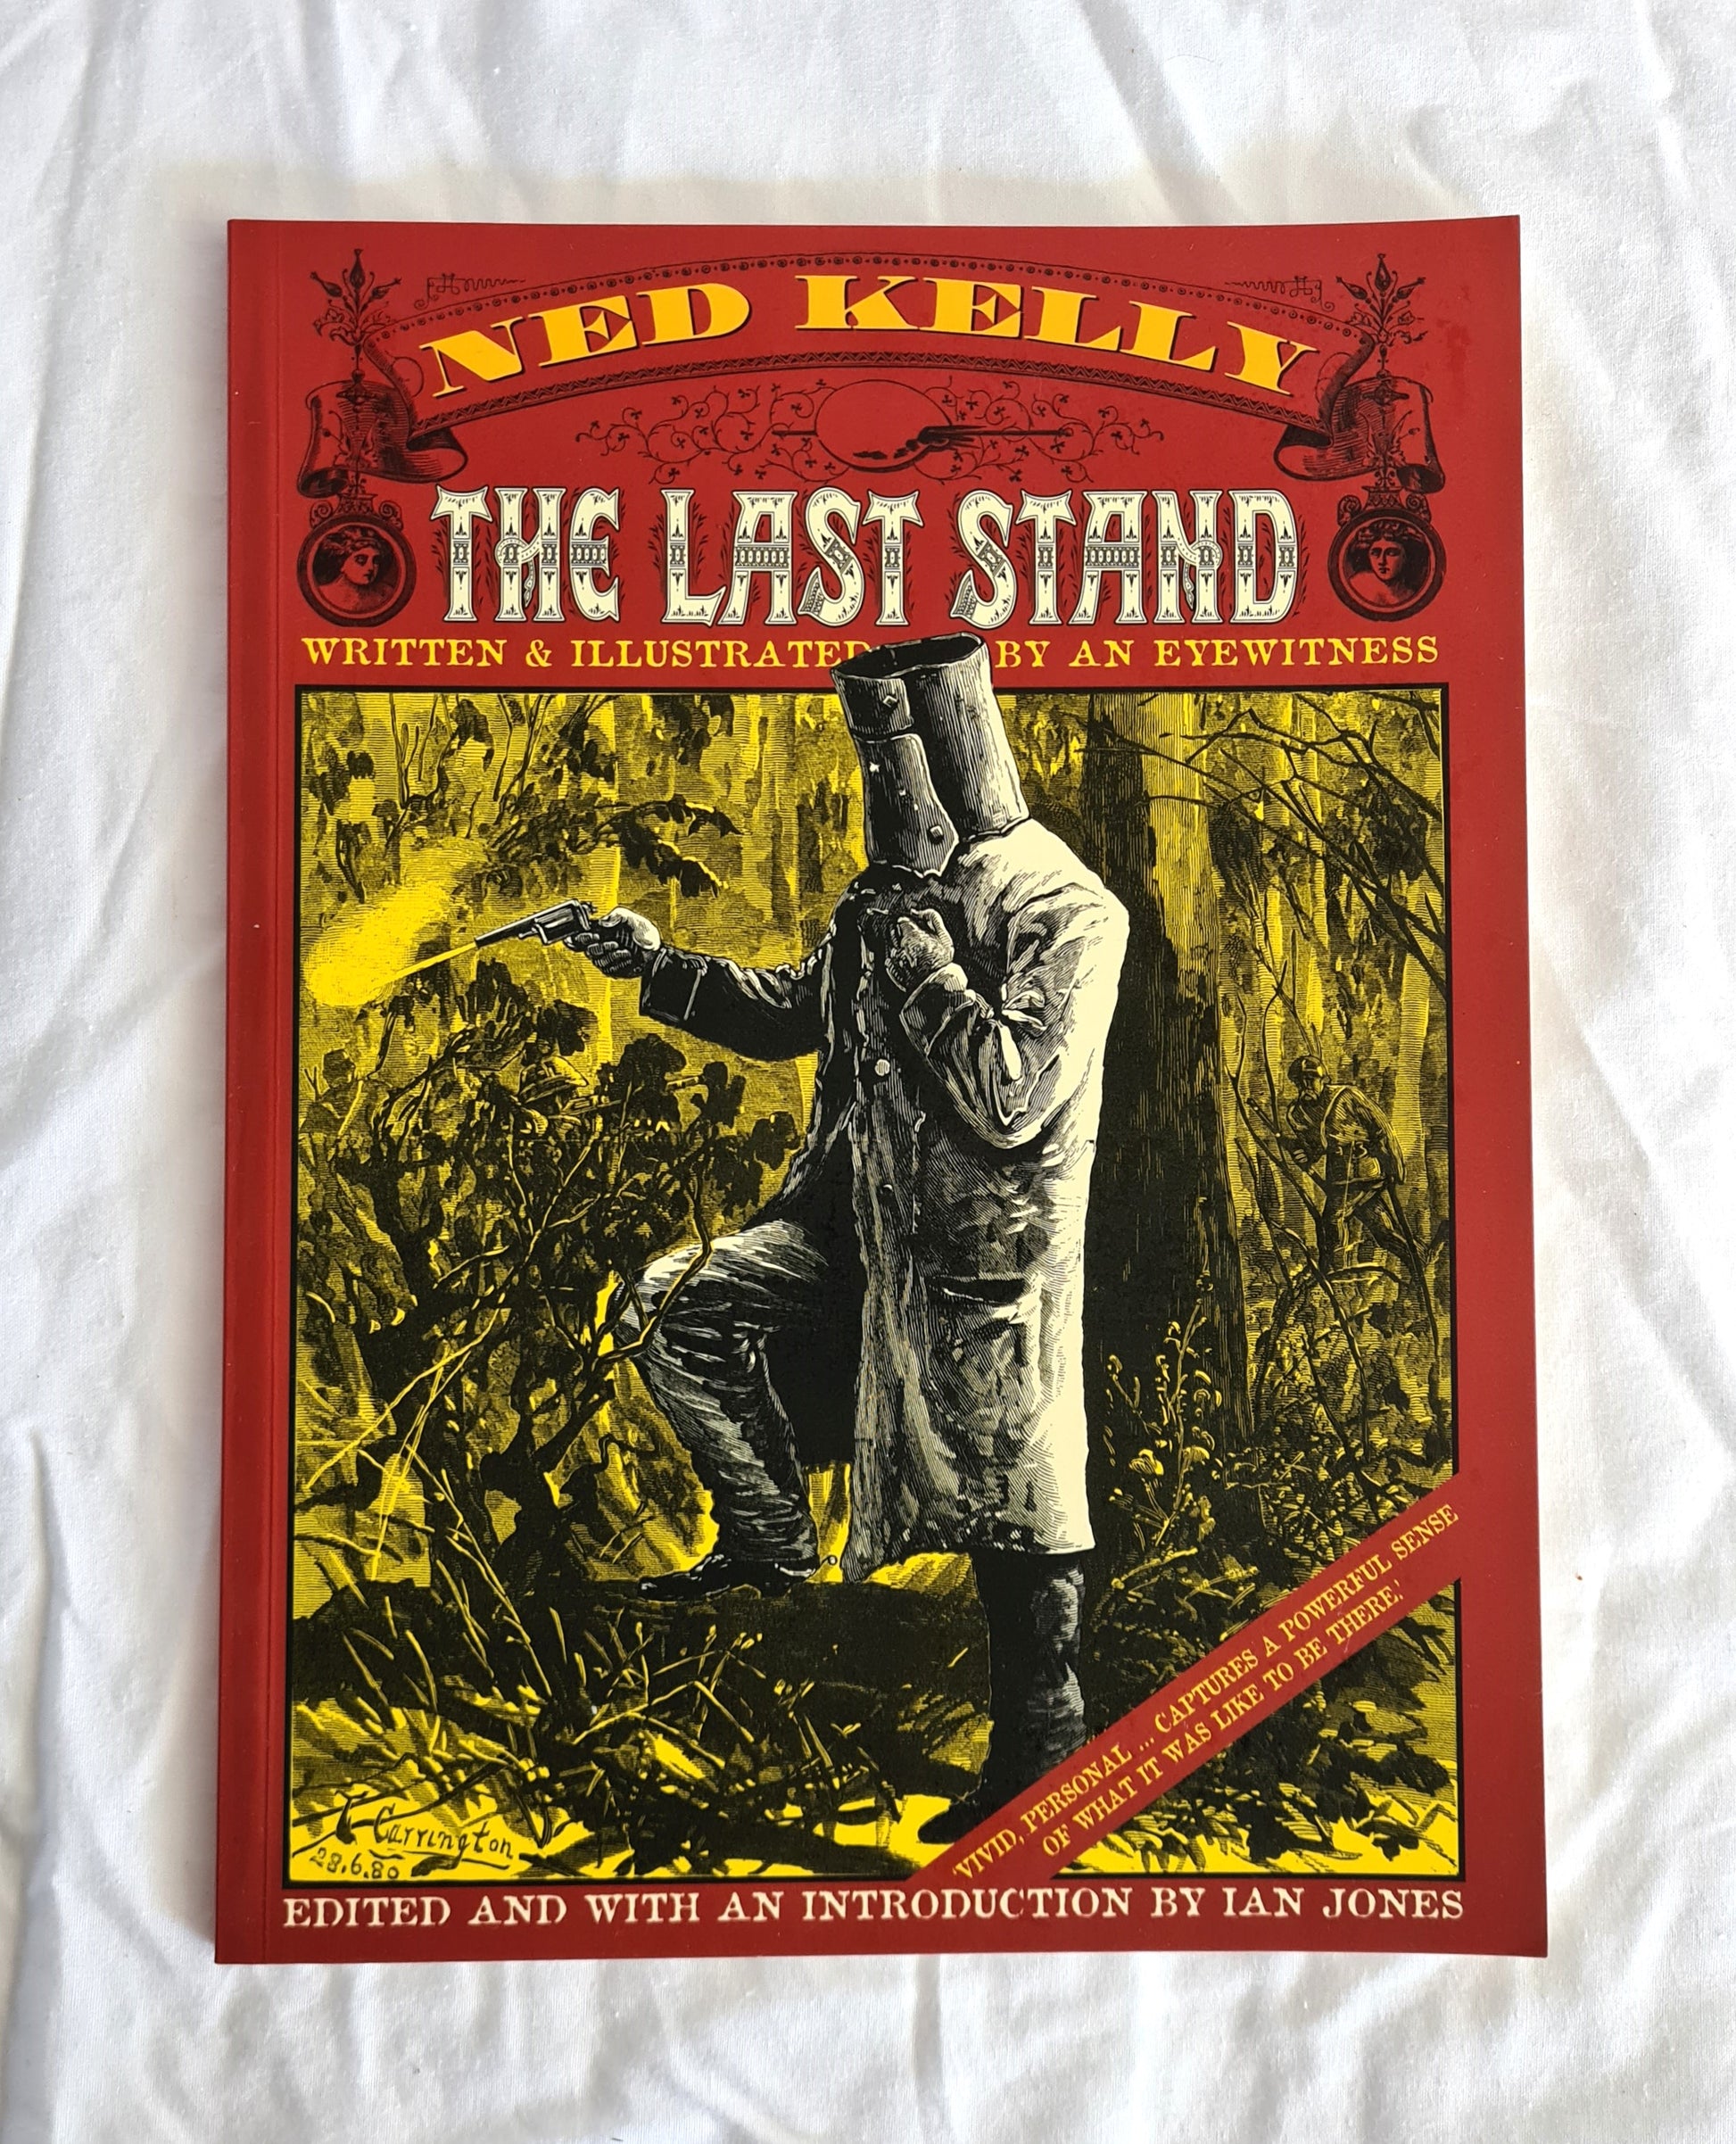 Ned Kelly The Last Stand  Written and illustrated by an eyewitness  Edited by Ian Jones